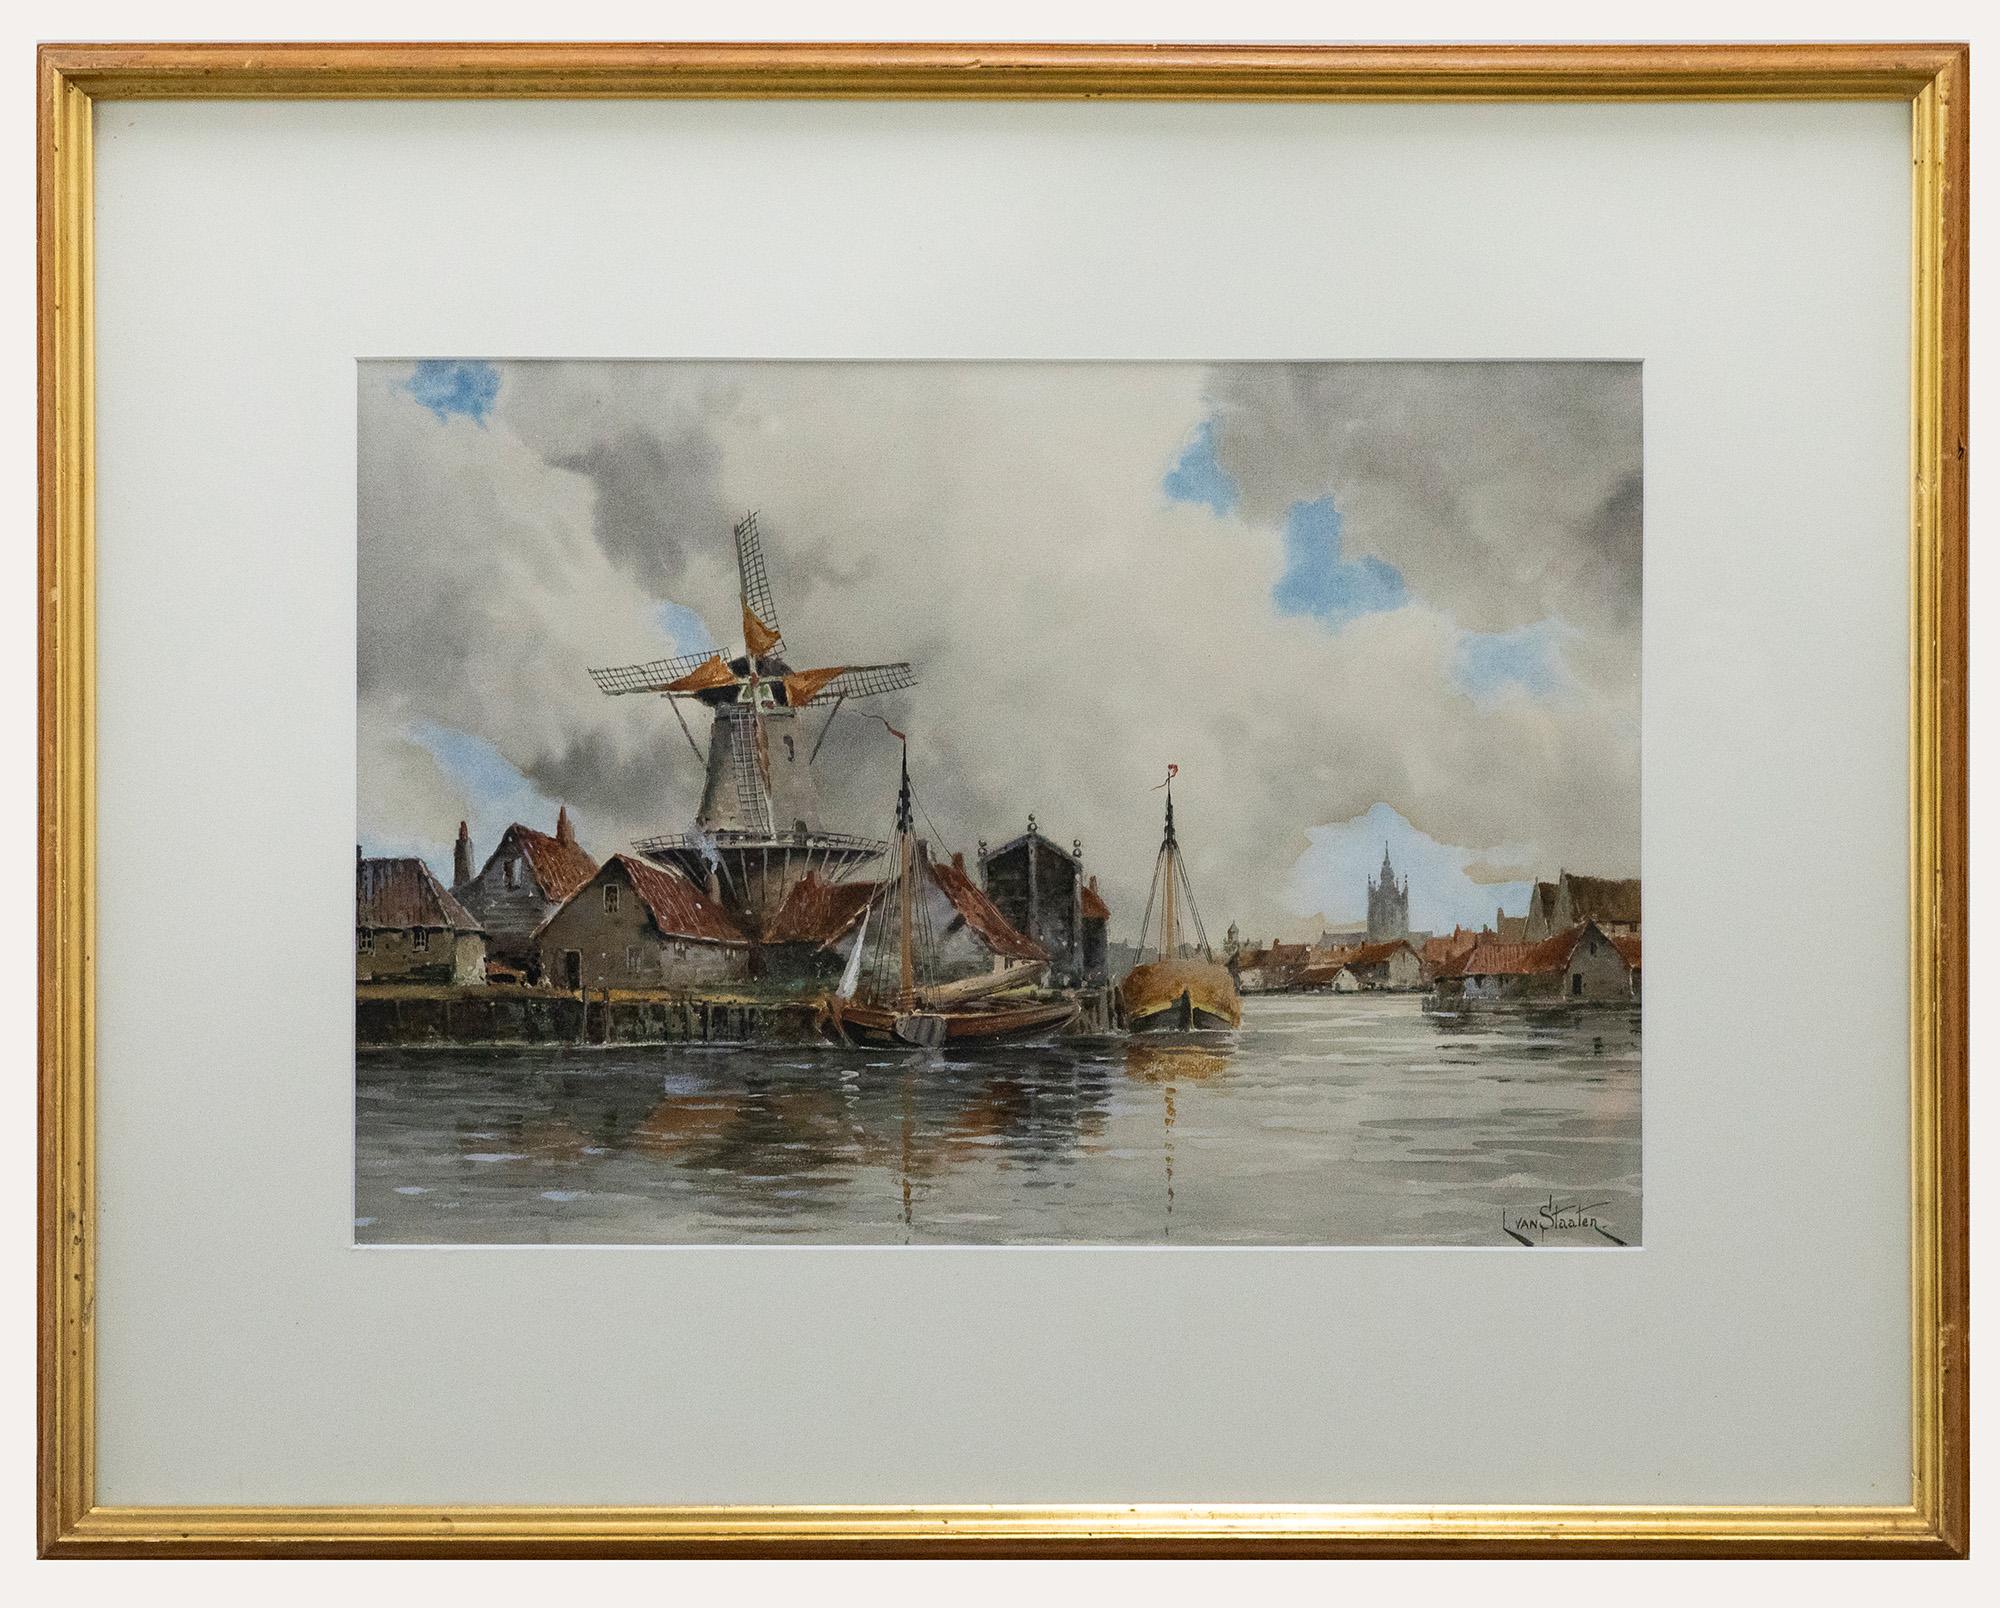 An original watercolour by the Dutch painter Louis Van Staaten, also known as Hermanus II Koekkoek (1836-1909). Signed to the lower right. Well-presented in a large gilt-effect frame with a crisp white mount. On paper. 